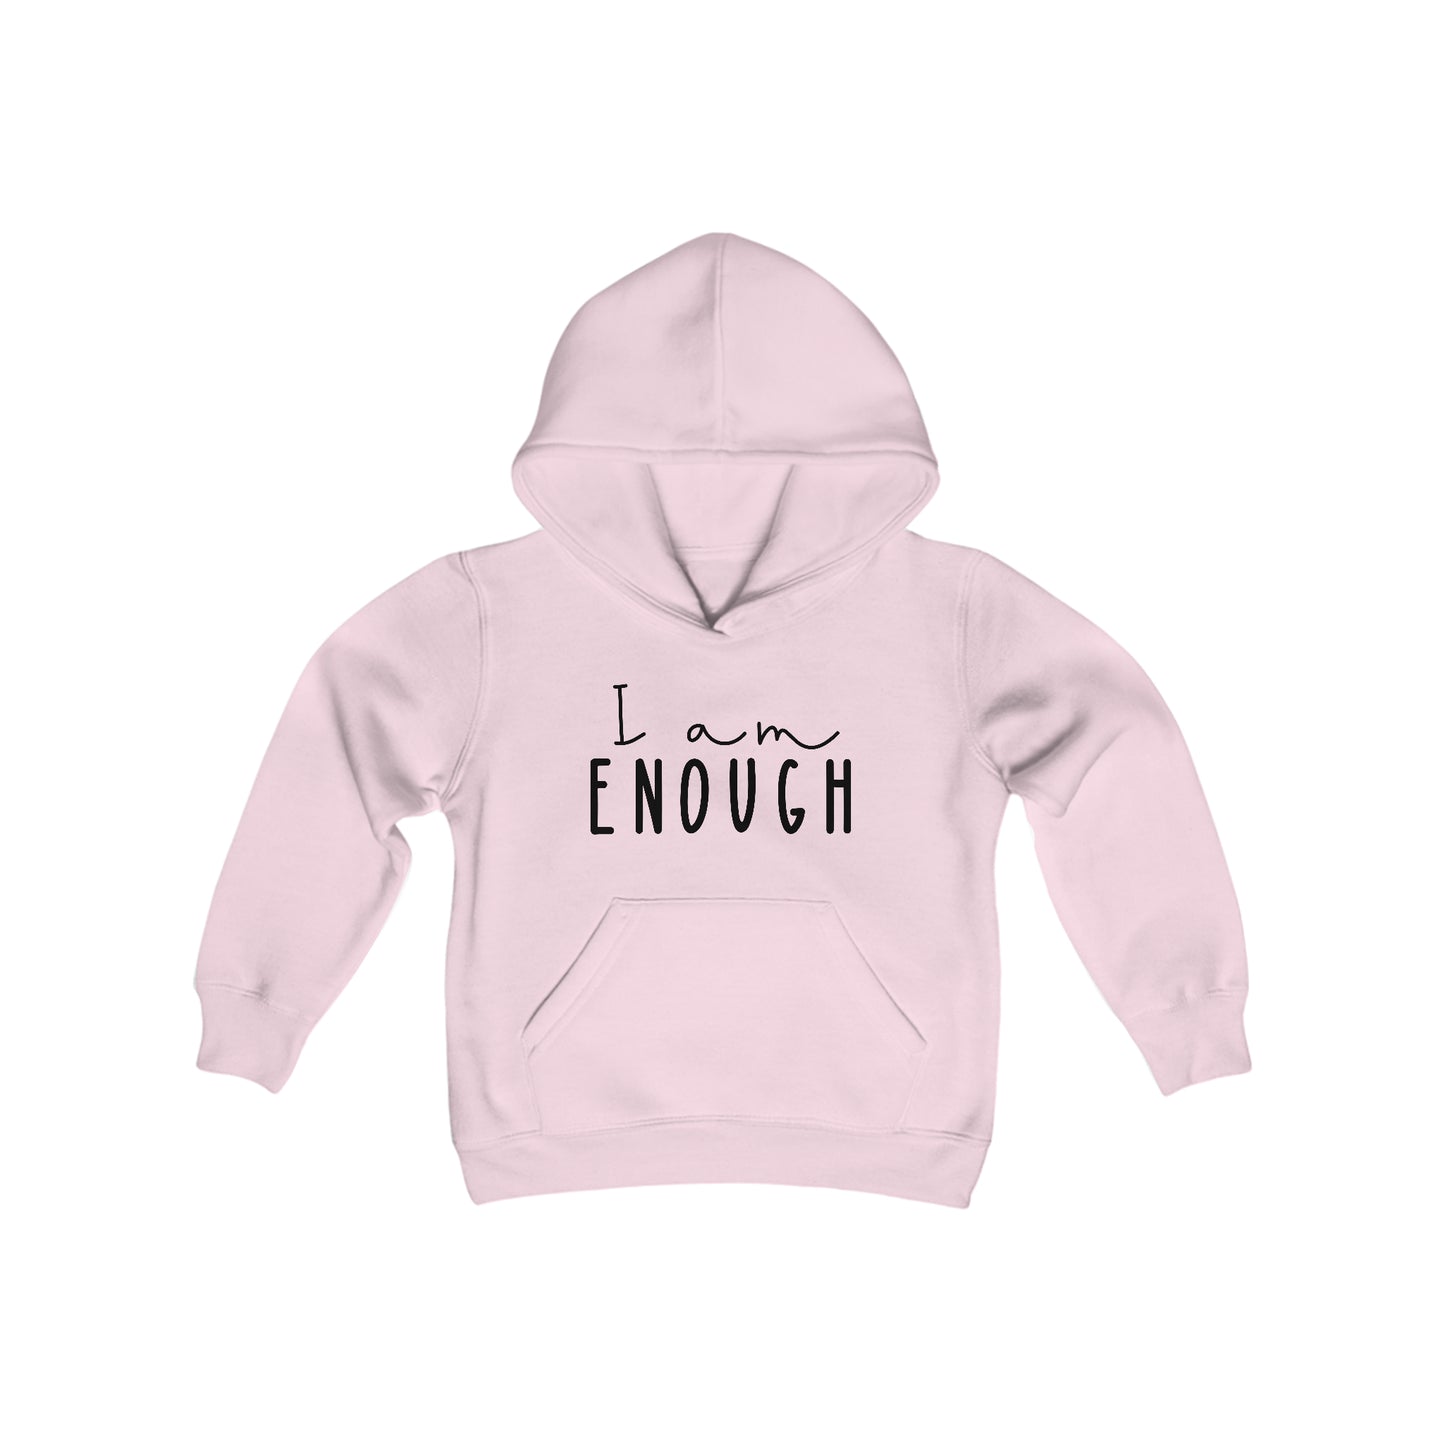 I am ENOUGH - Inspiration - Self Love - Self Acceptance - Youth Heavy Blend Hooded Sweatshirt